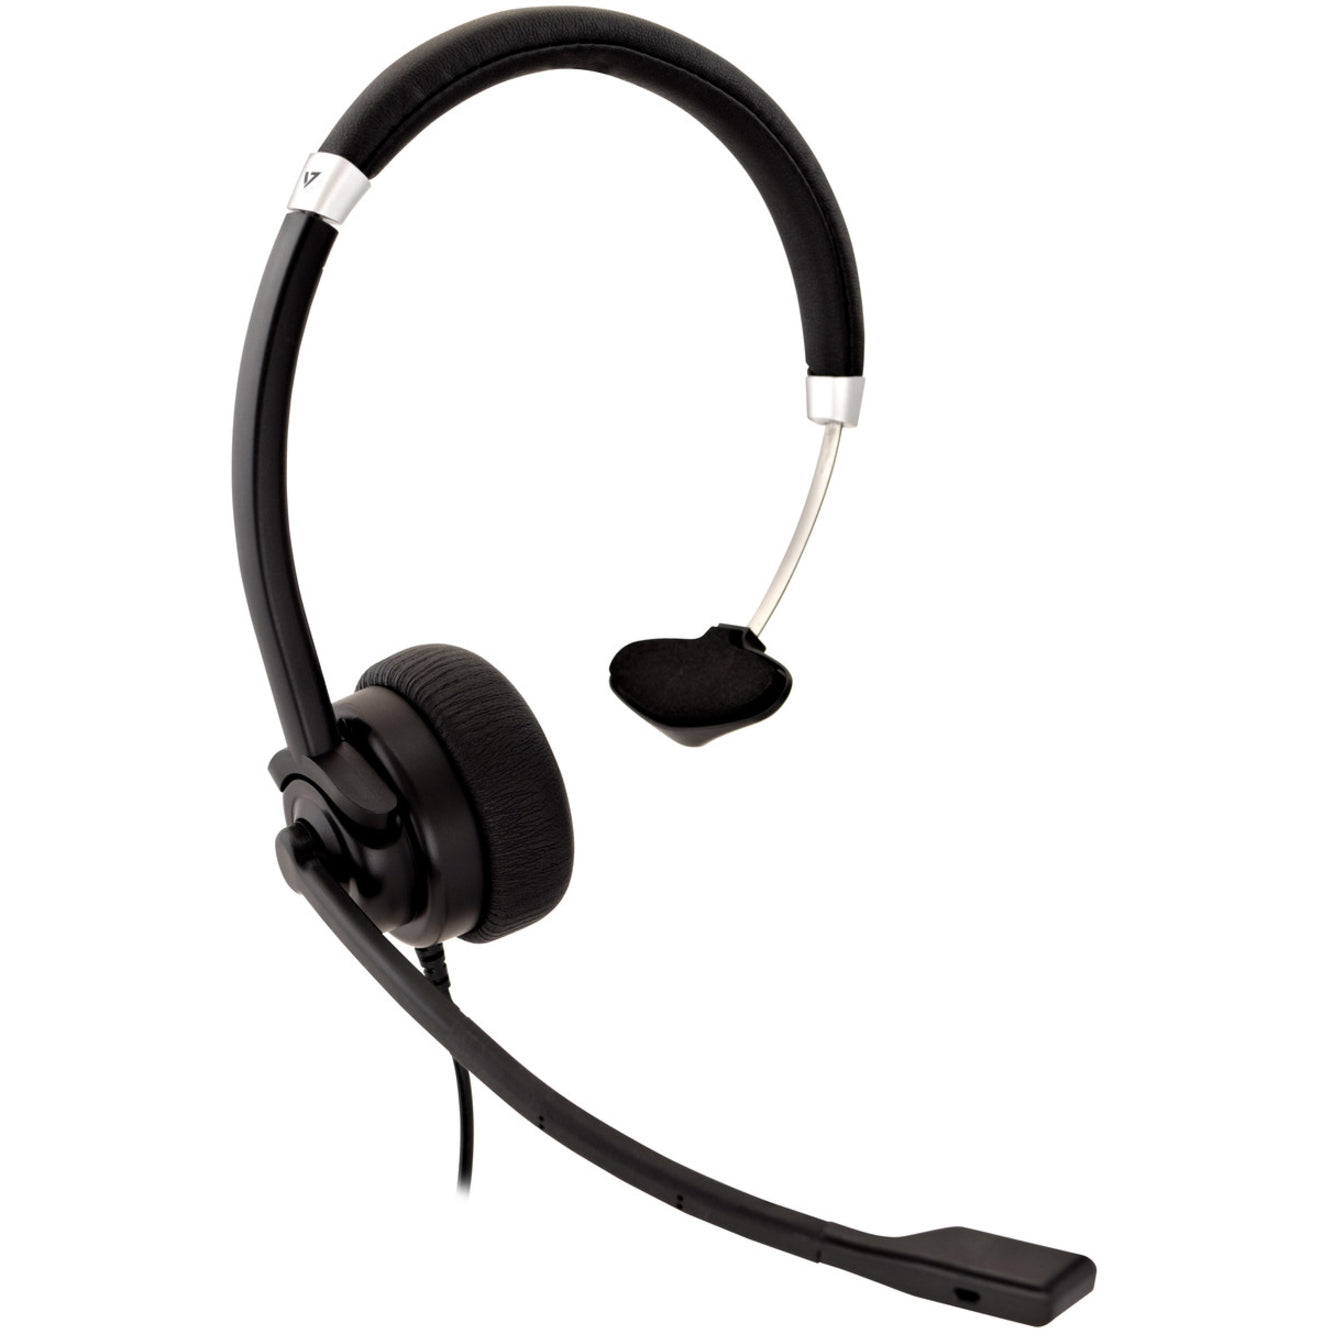 V7 HU411 Deluxe USB Mono Headset with Boom Mic, Over-the-head, Noise Cancelling, 2 Year Warranty